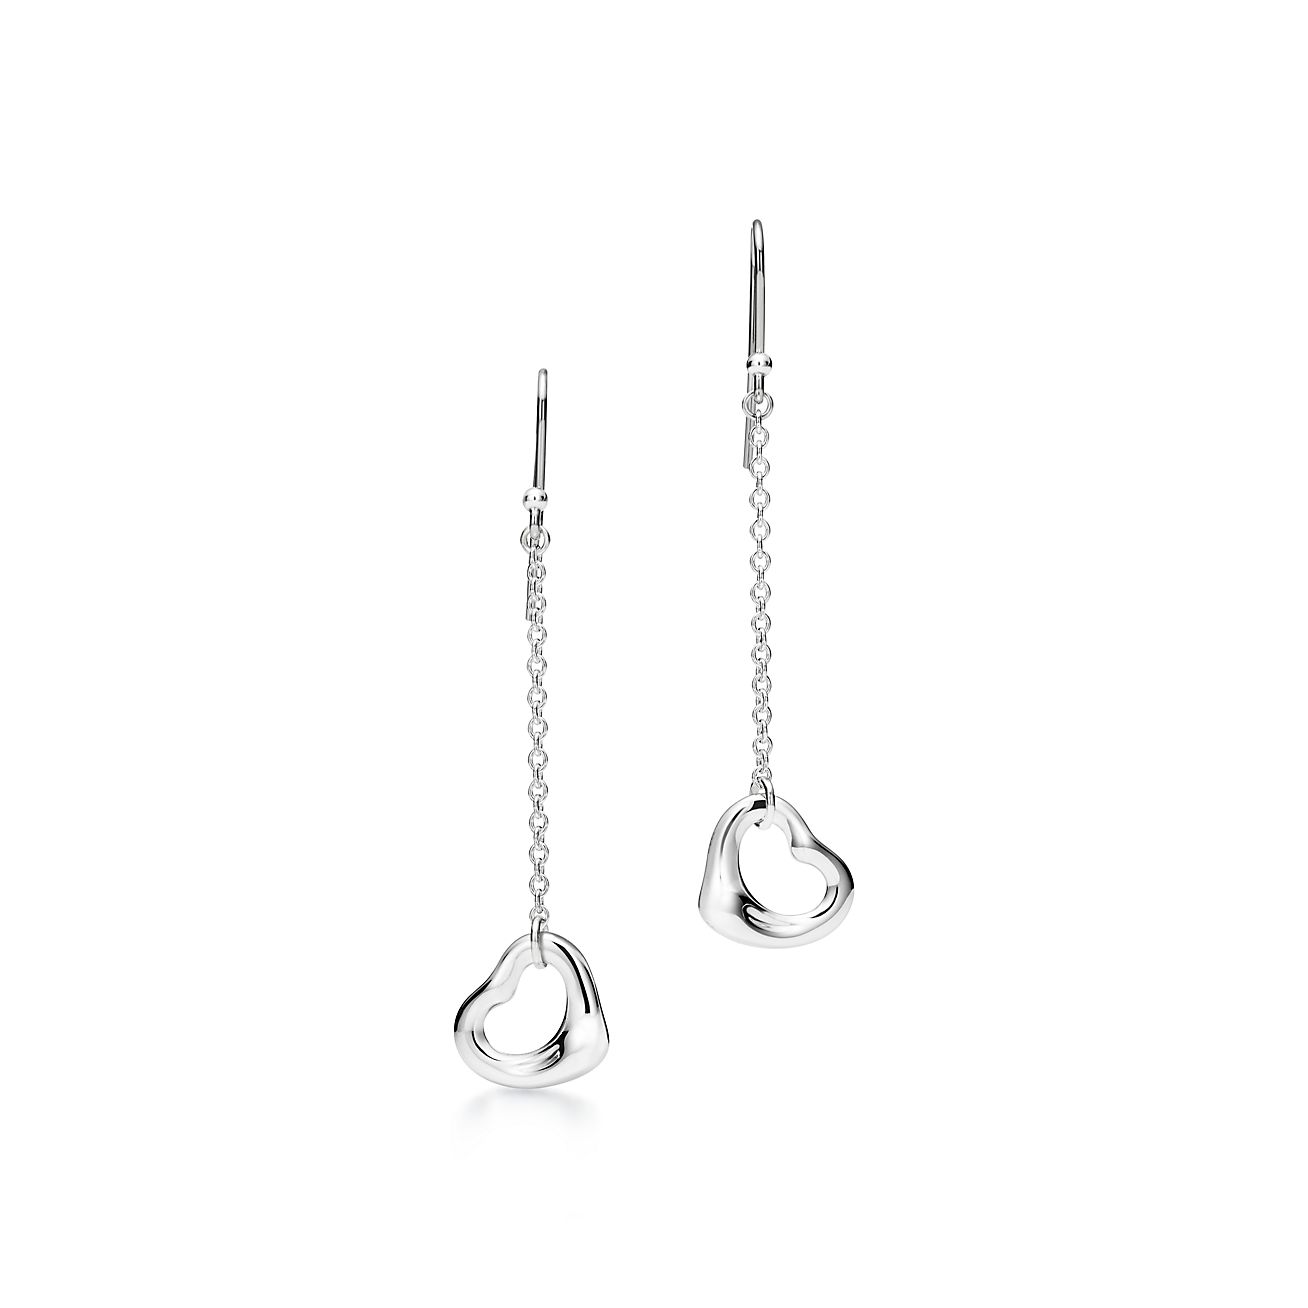 Amazon.com: LaTisoro 925 Solid Sterling Silver Big Filigree Teardrop  Earrings, Large Raindrop Allergy Free Jewelry : Clothing, Shoes & Jewelry